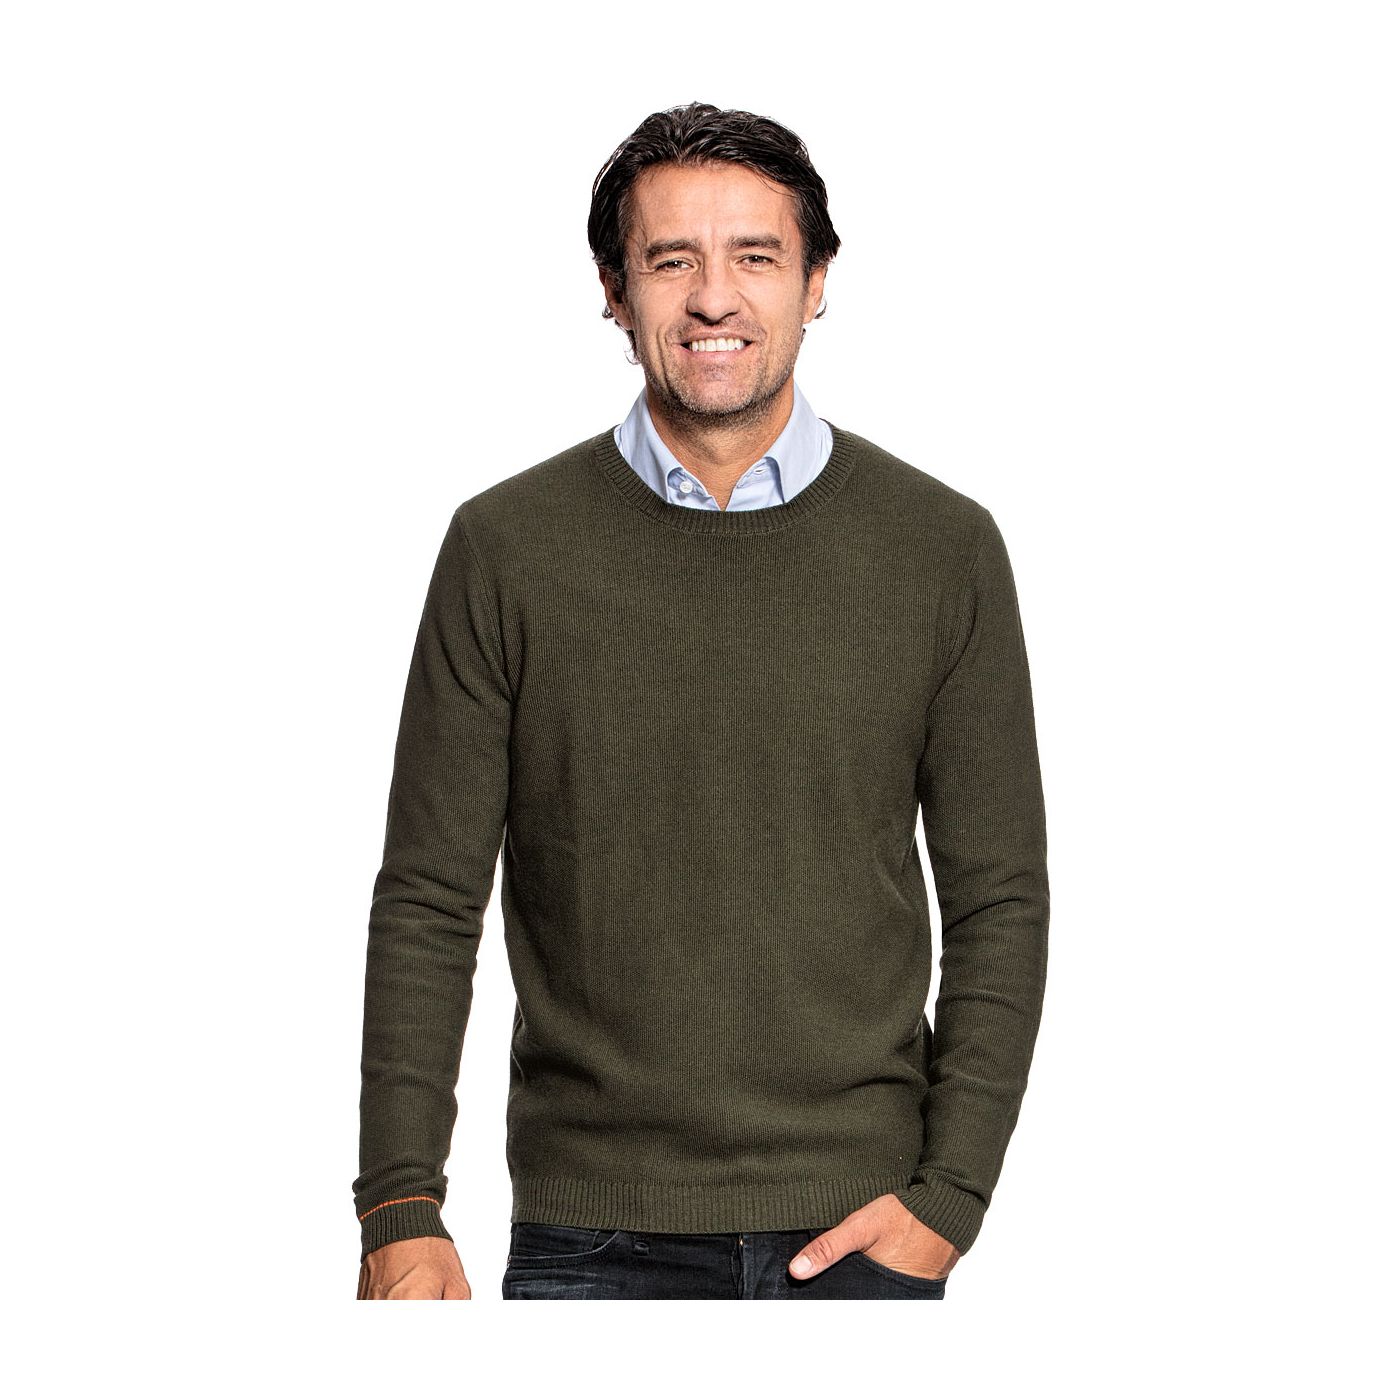 Honeycomb knit sweater for men made of Merino wool in Green